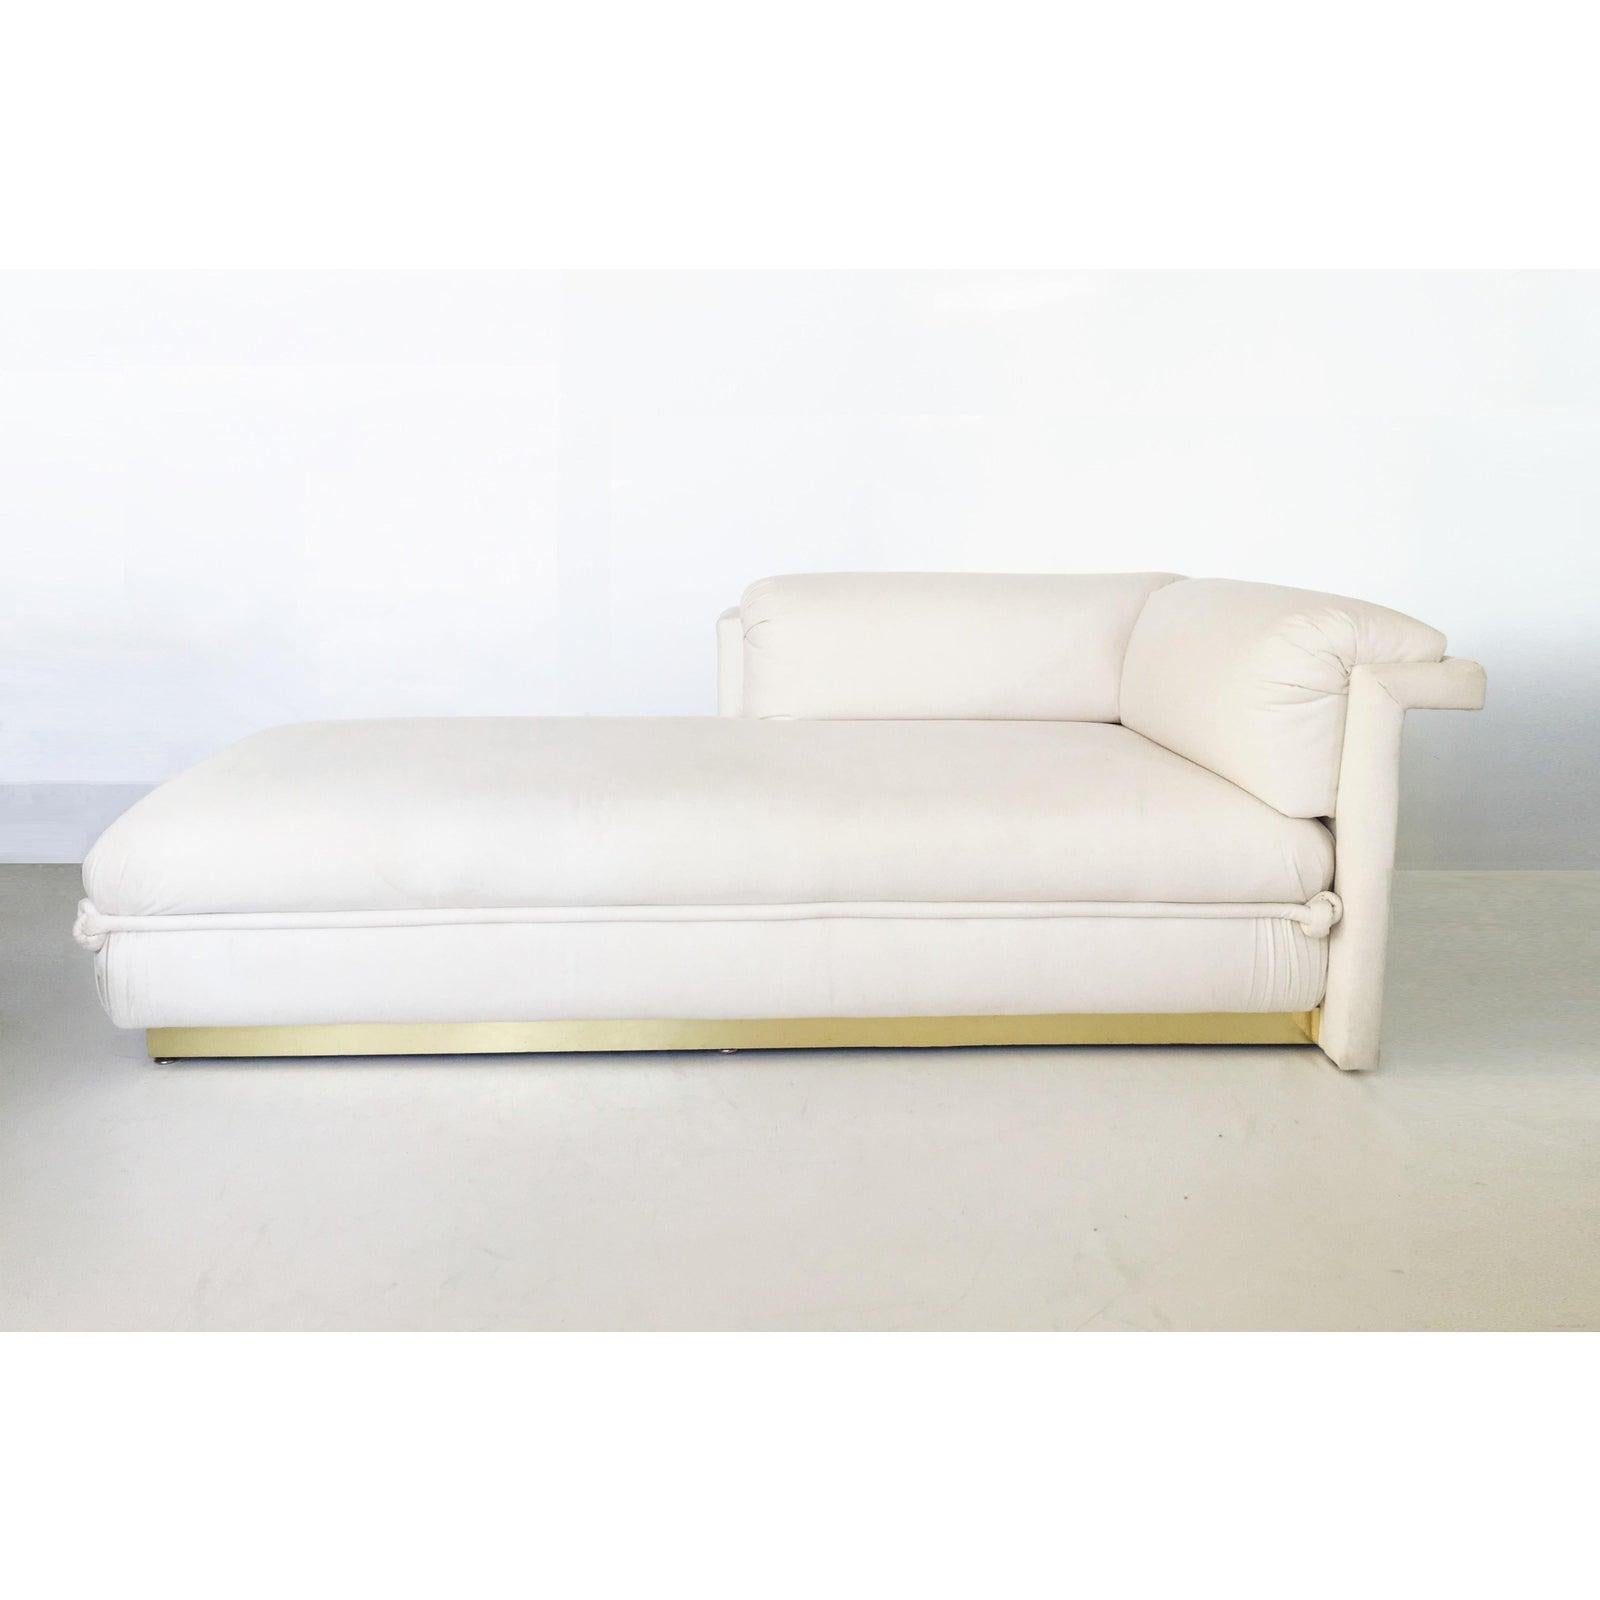 Offered are two French Art Deco chaise lounges with brass base. These exquisite chaise lounges that combine the most contemporary shape. Professionally upholstered with beautiful rope detailing and raised upon brass plinth base so they appear to